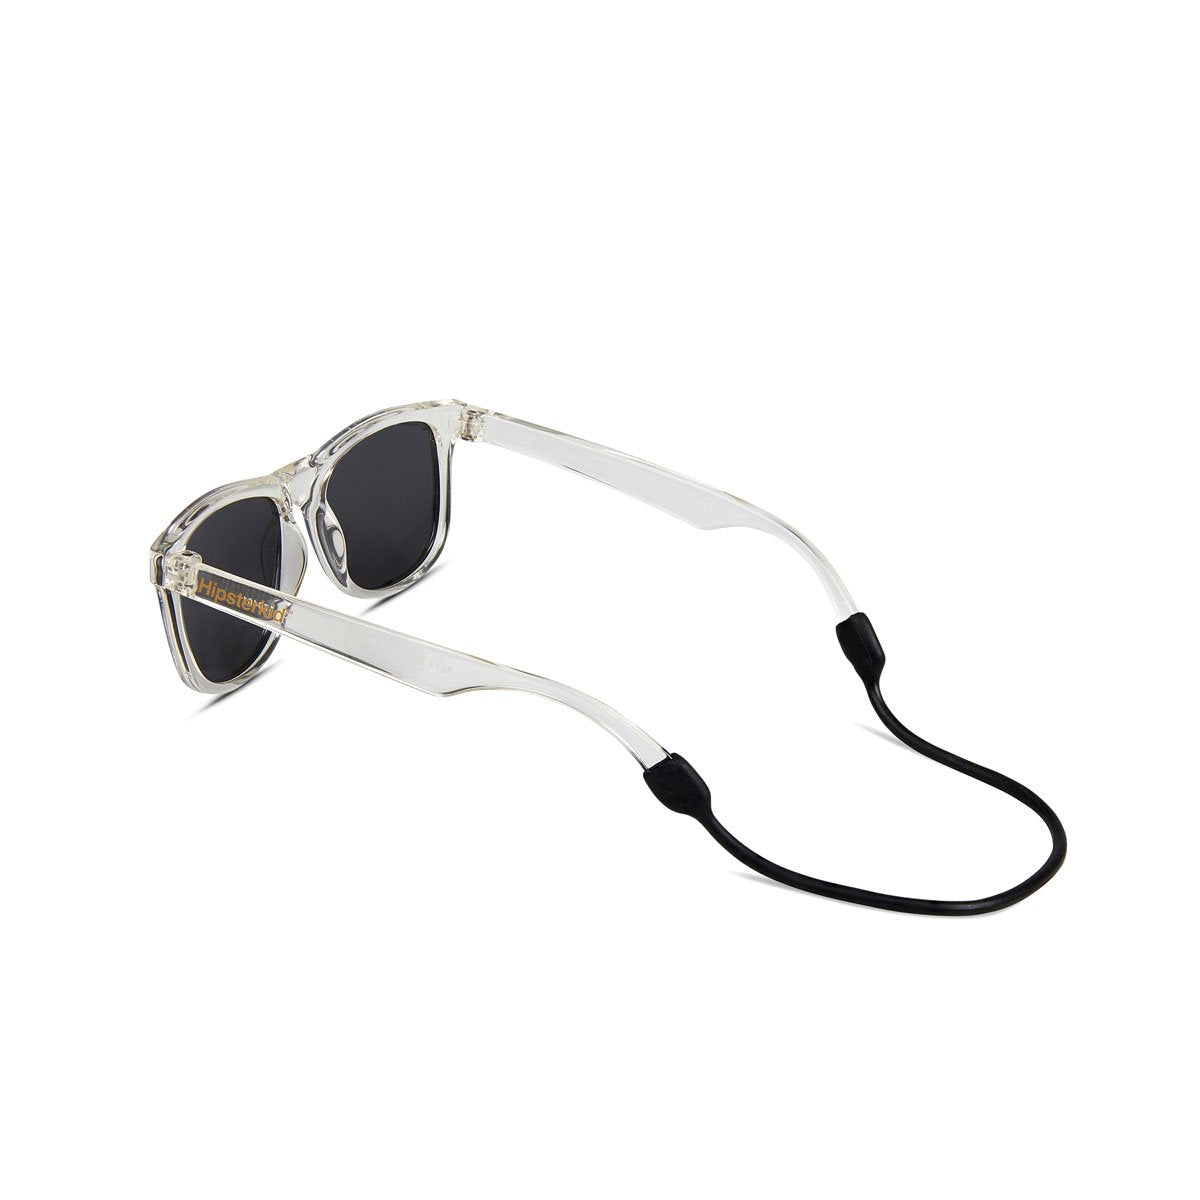 Hipsterkid Golds Baby Sunglasses - Clear (0-2 years)